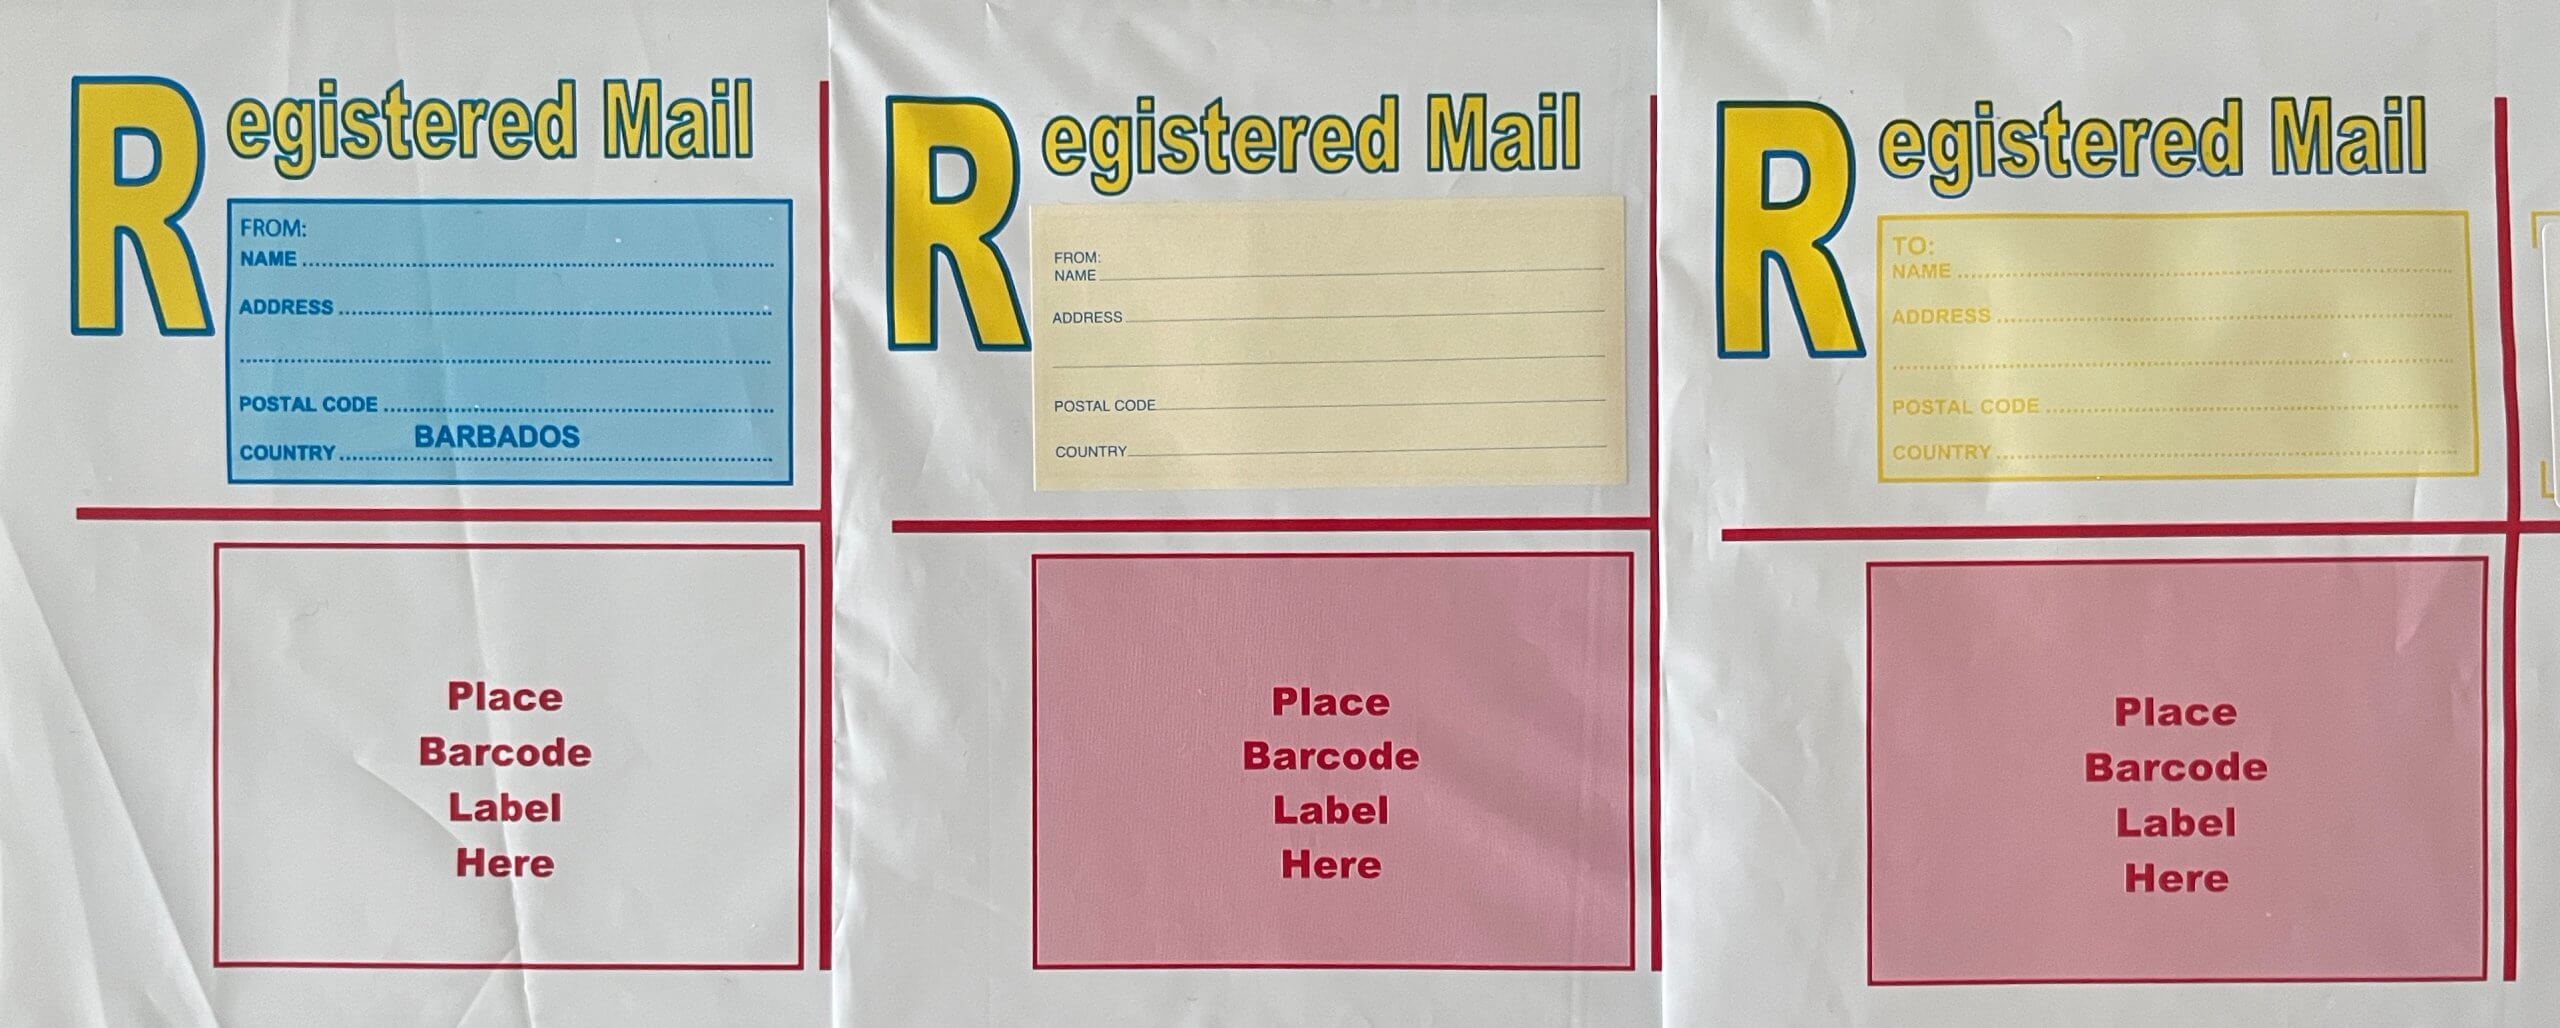 All three types of A5 registered mail envelopes